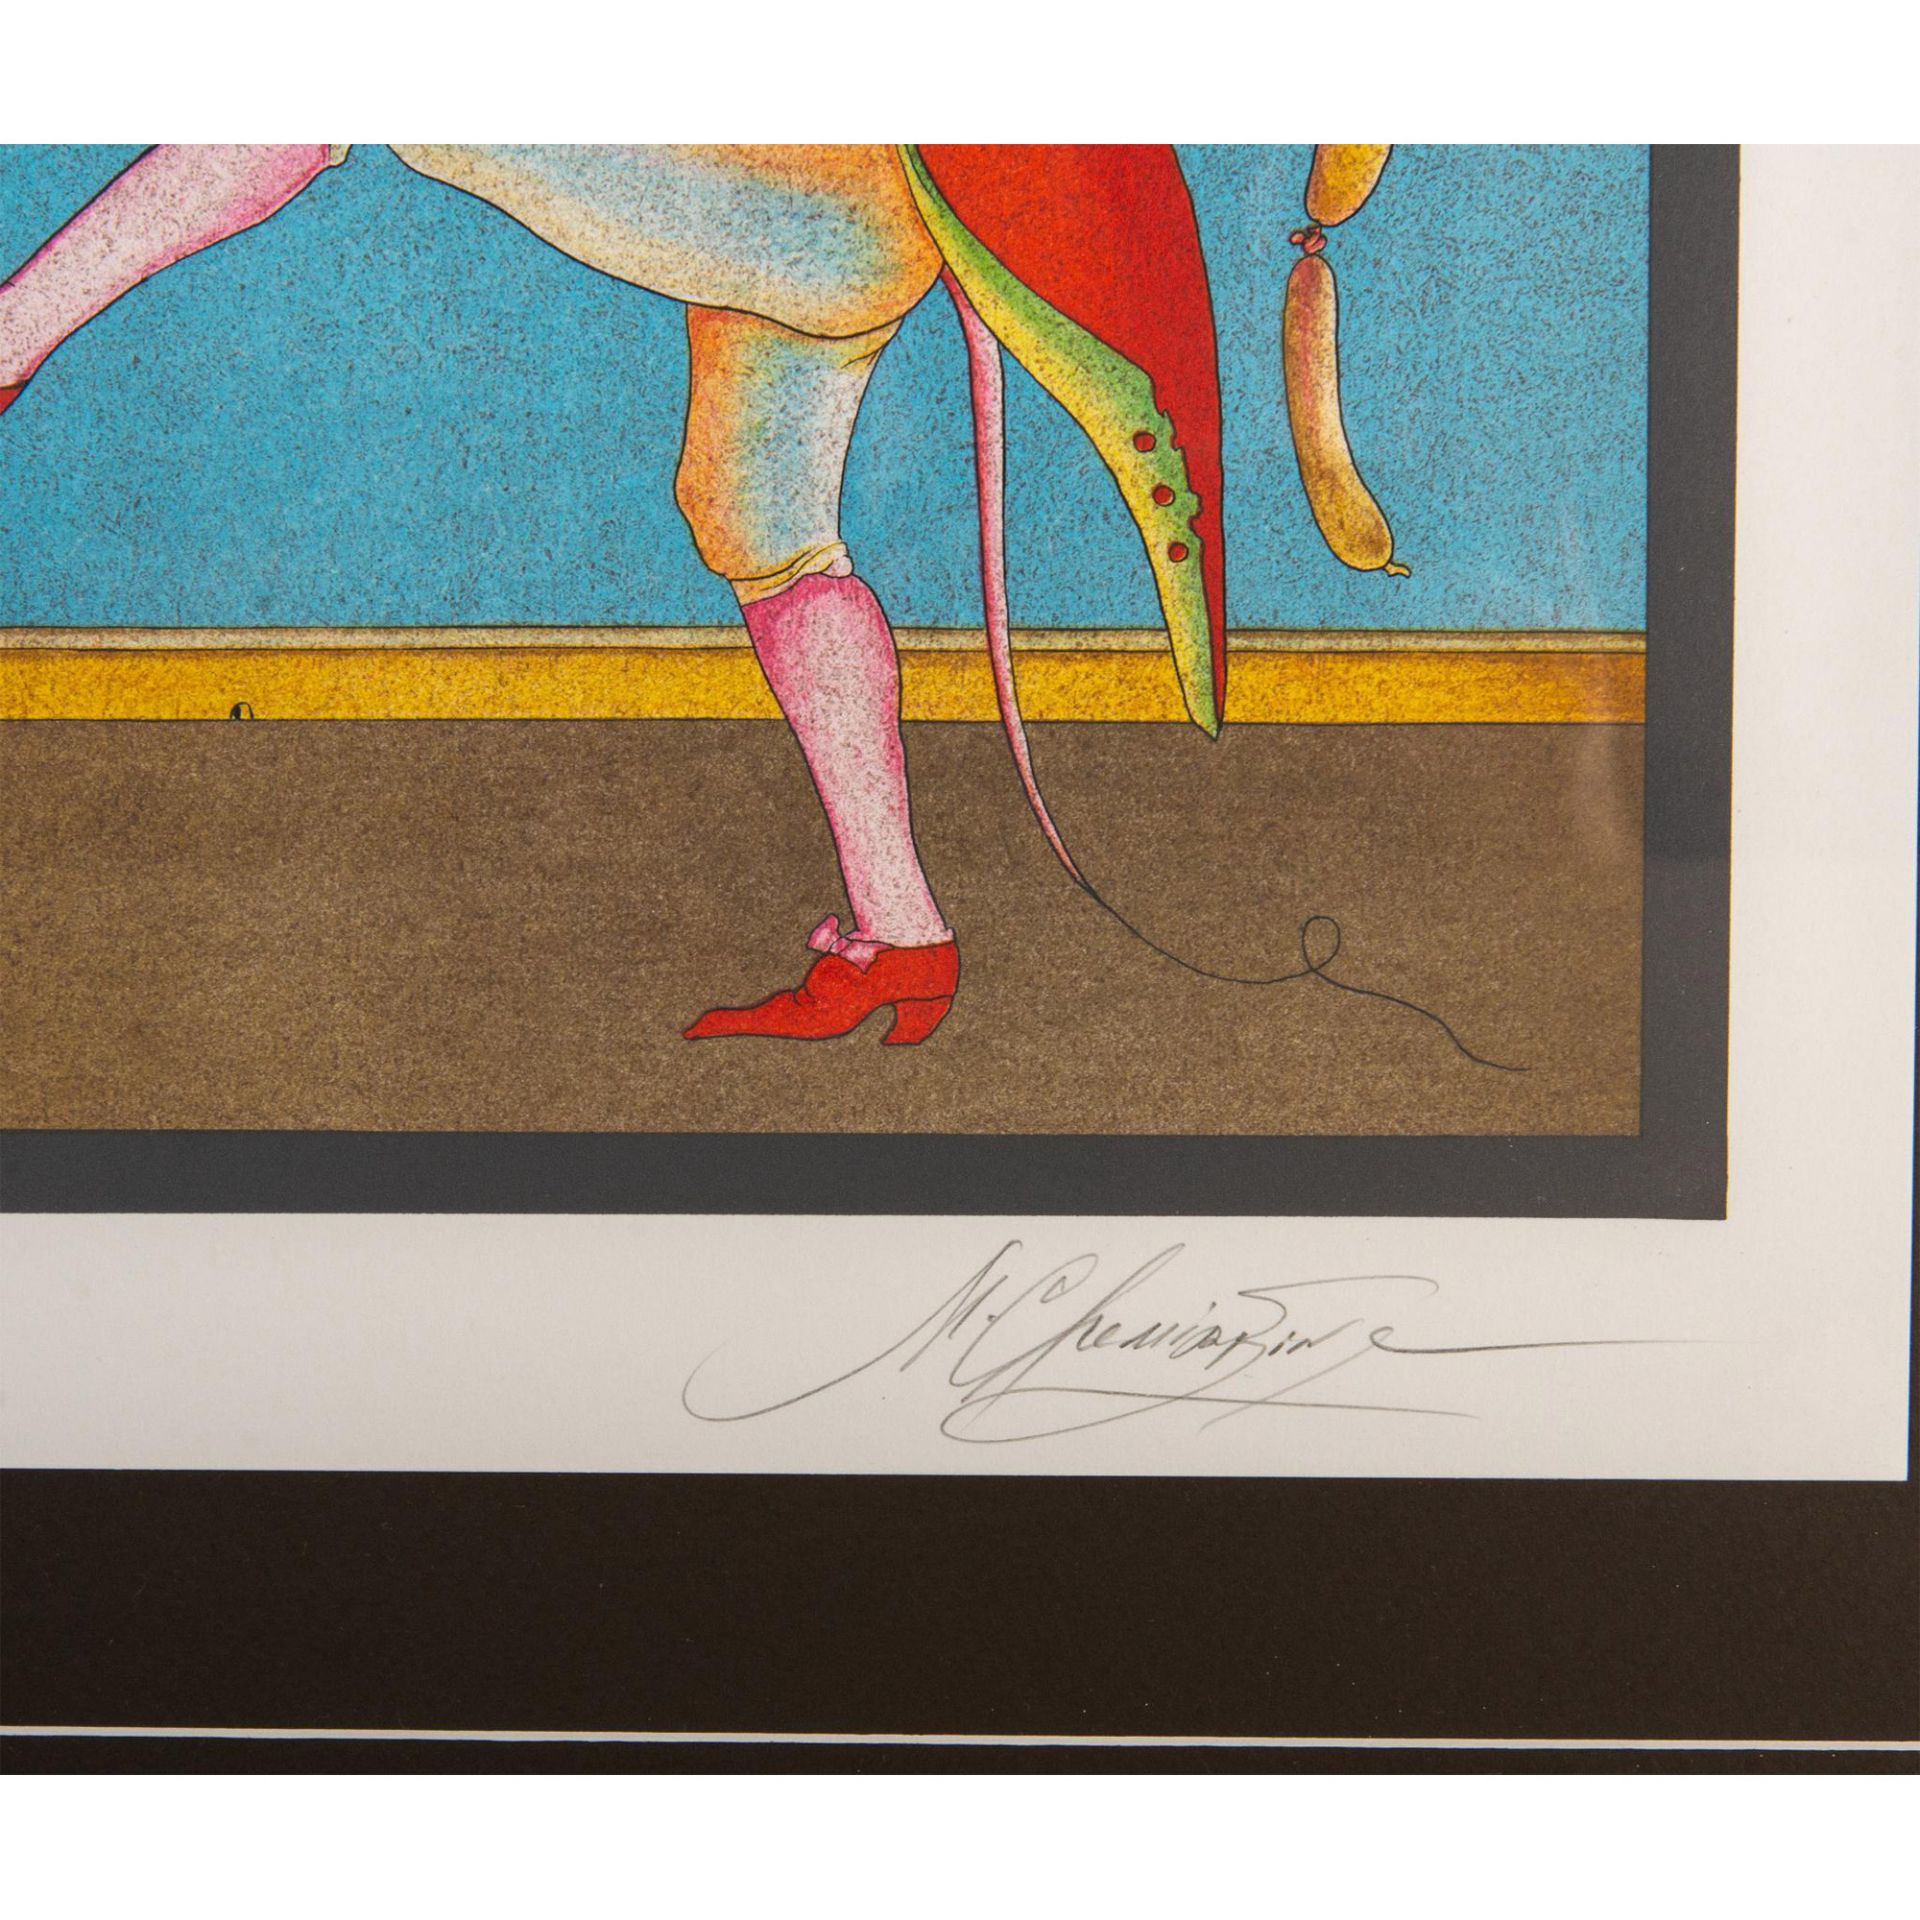 Mihail Chemiakin (Russian/French, b.1943) Color Lithograph on Velin Paper, Signed - Image 3 of 6